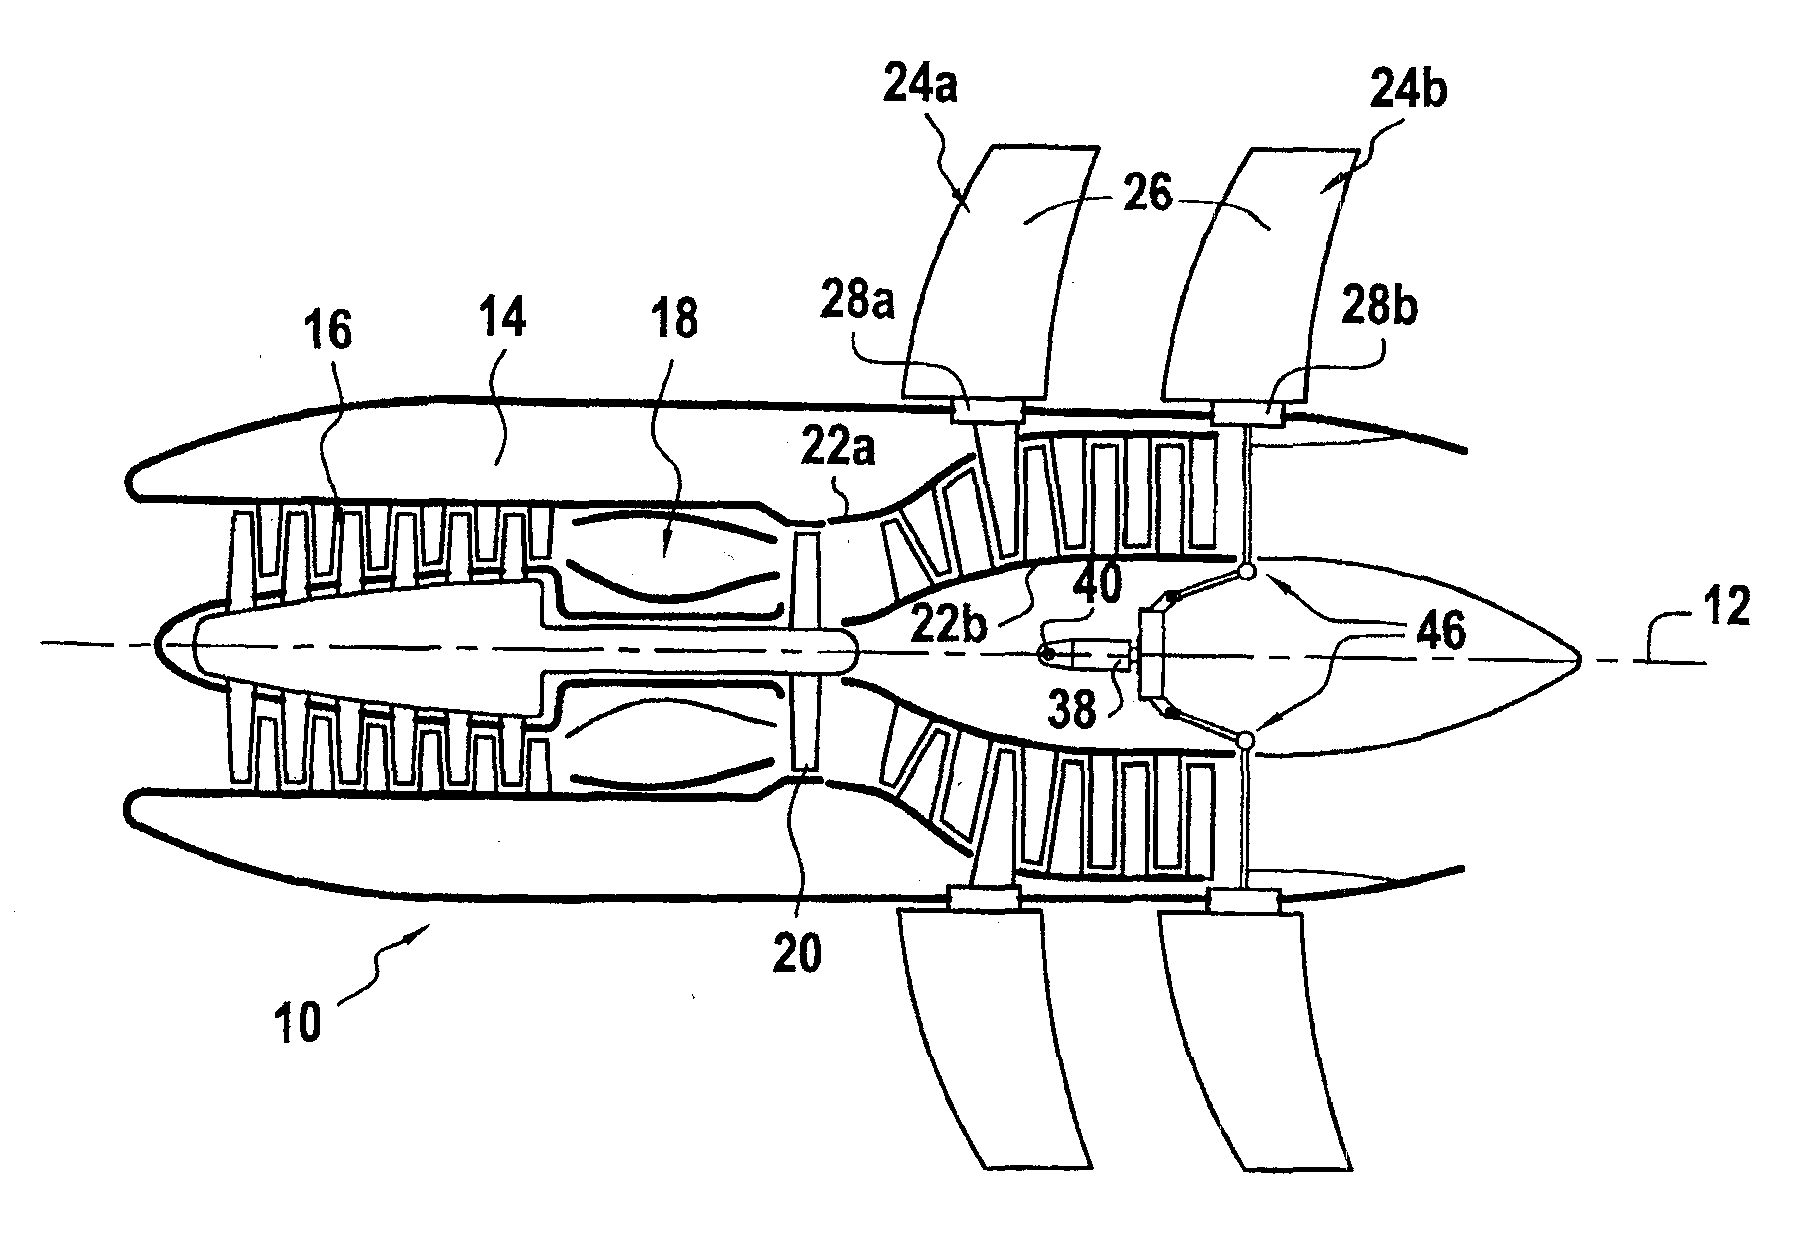 Stationary actuator device for controlling the pitch of fan blades of a turboprop